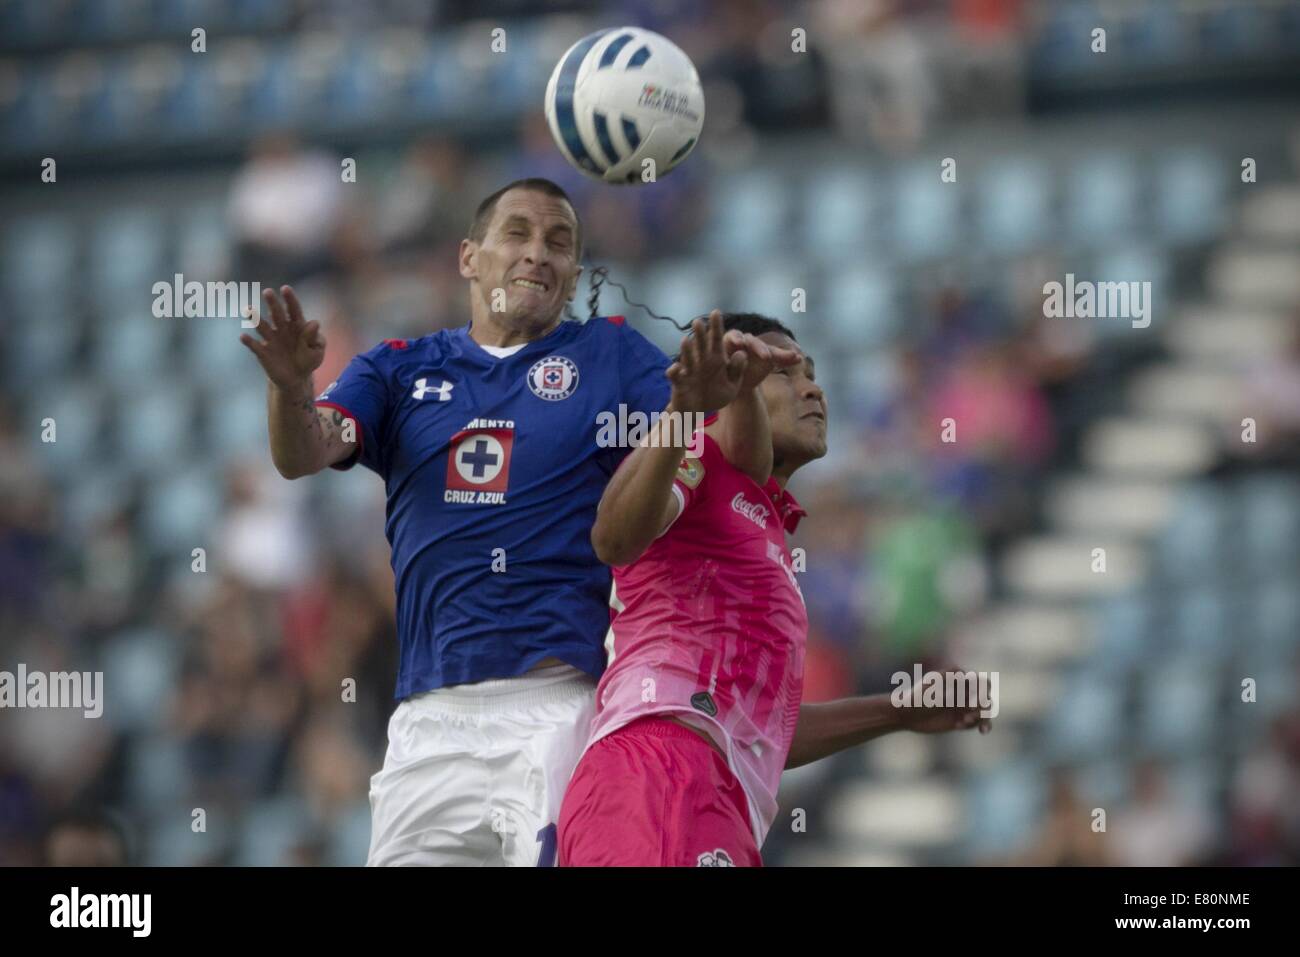 Mexico City, Mexico. 27th Sep, 2014. Christian Gimenez (L) of Cruz Azul vies for the ball with Carlos Pena of Leon during a match of the MX League Opening Tournament, at Azul Stadium, in Mexico City, capital of Mexico, on Sept. 27, 2014. Credit:  Alejandro Ayala/Xinhua/Alamy Live News Stock Photo